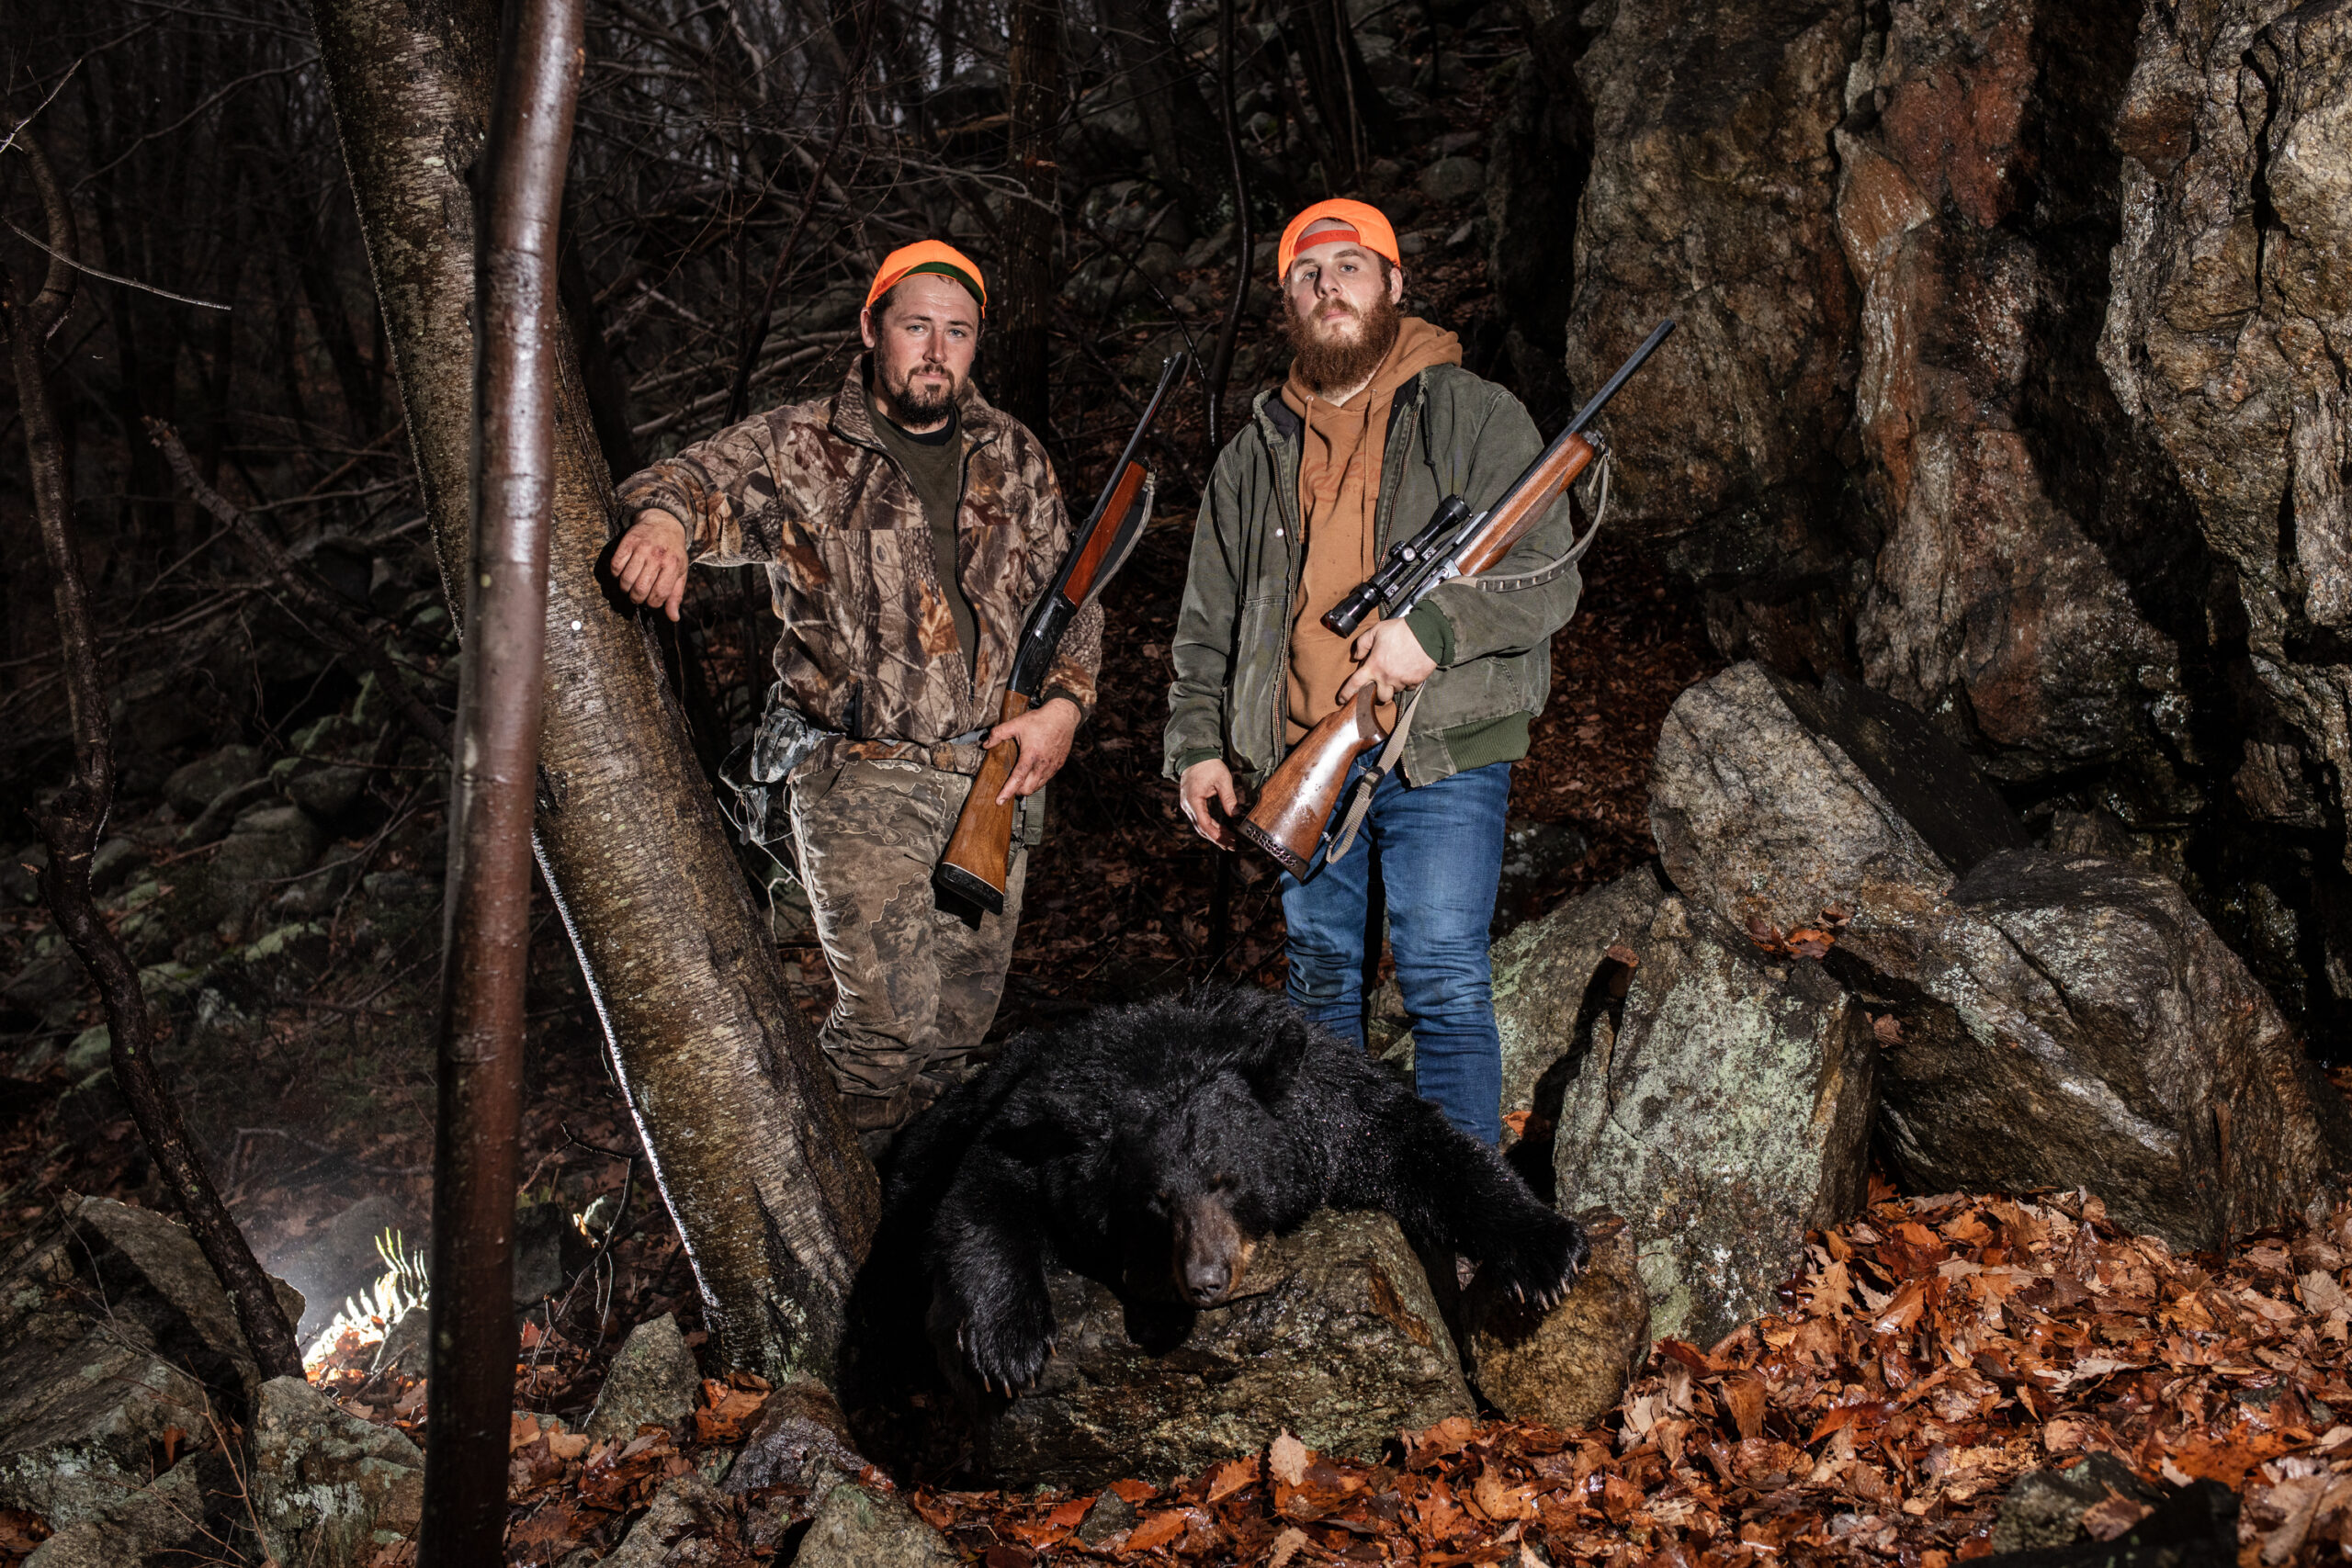 Photos From the New Jersey Bear Season, the Highly Controversial Hunt That Wasn’t